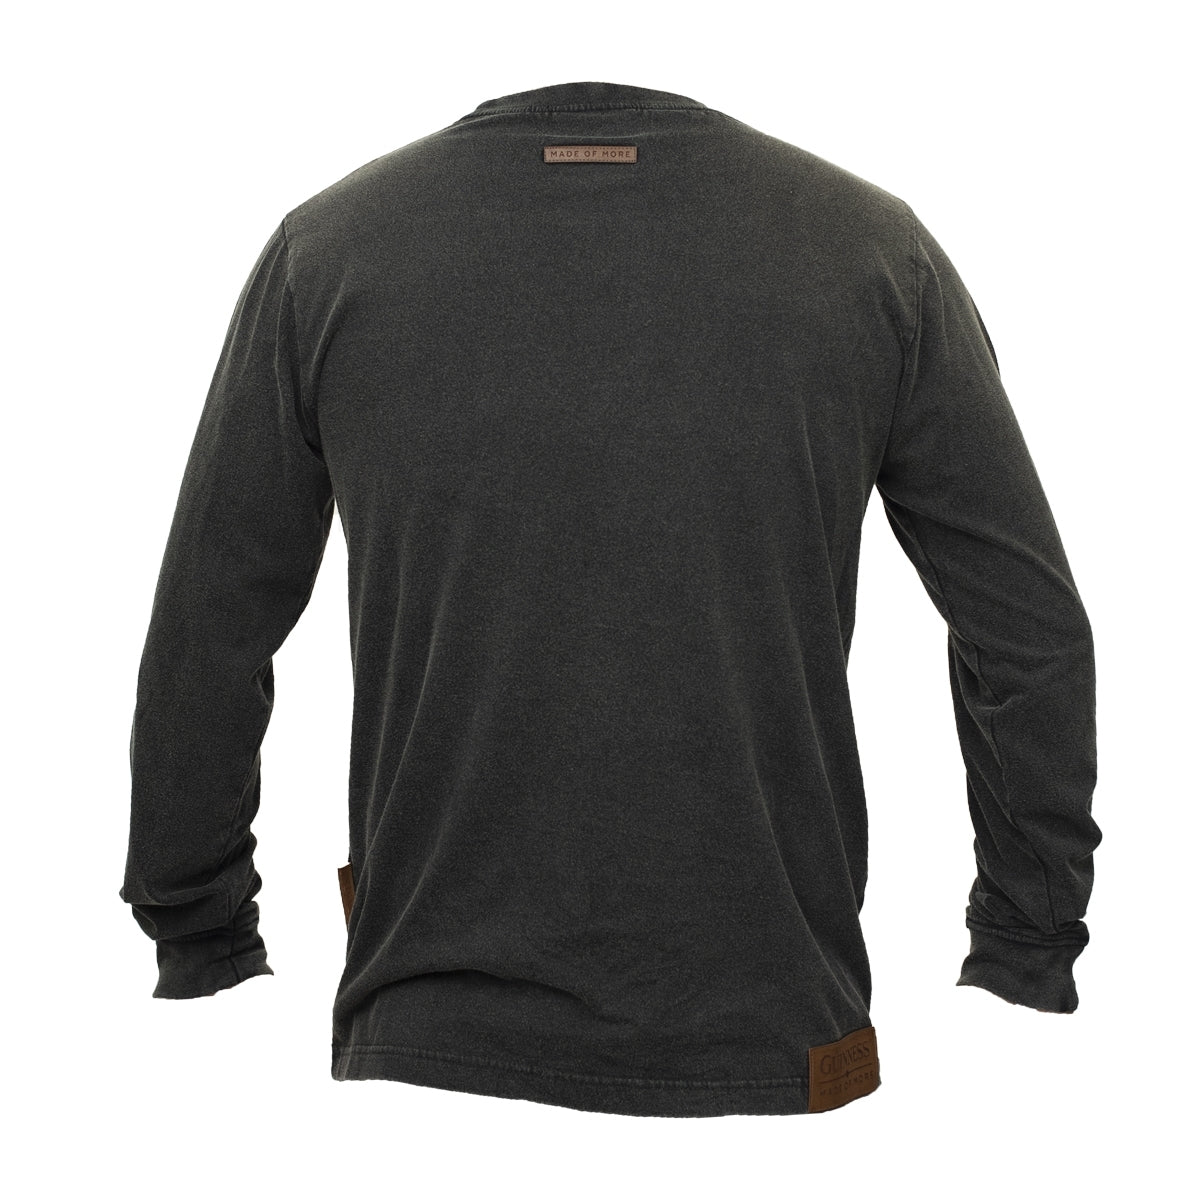 The back view of a man wearing a Guinness Long Sleeve Premium Tee by Guinness.